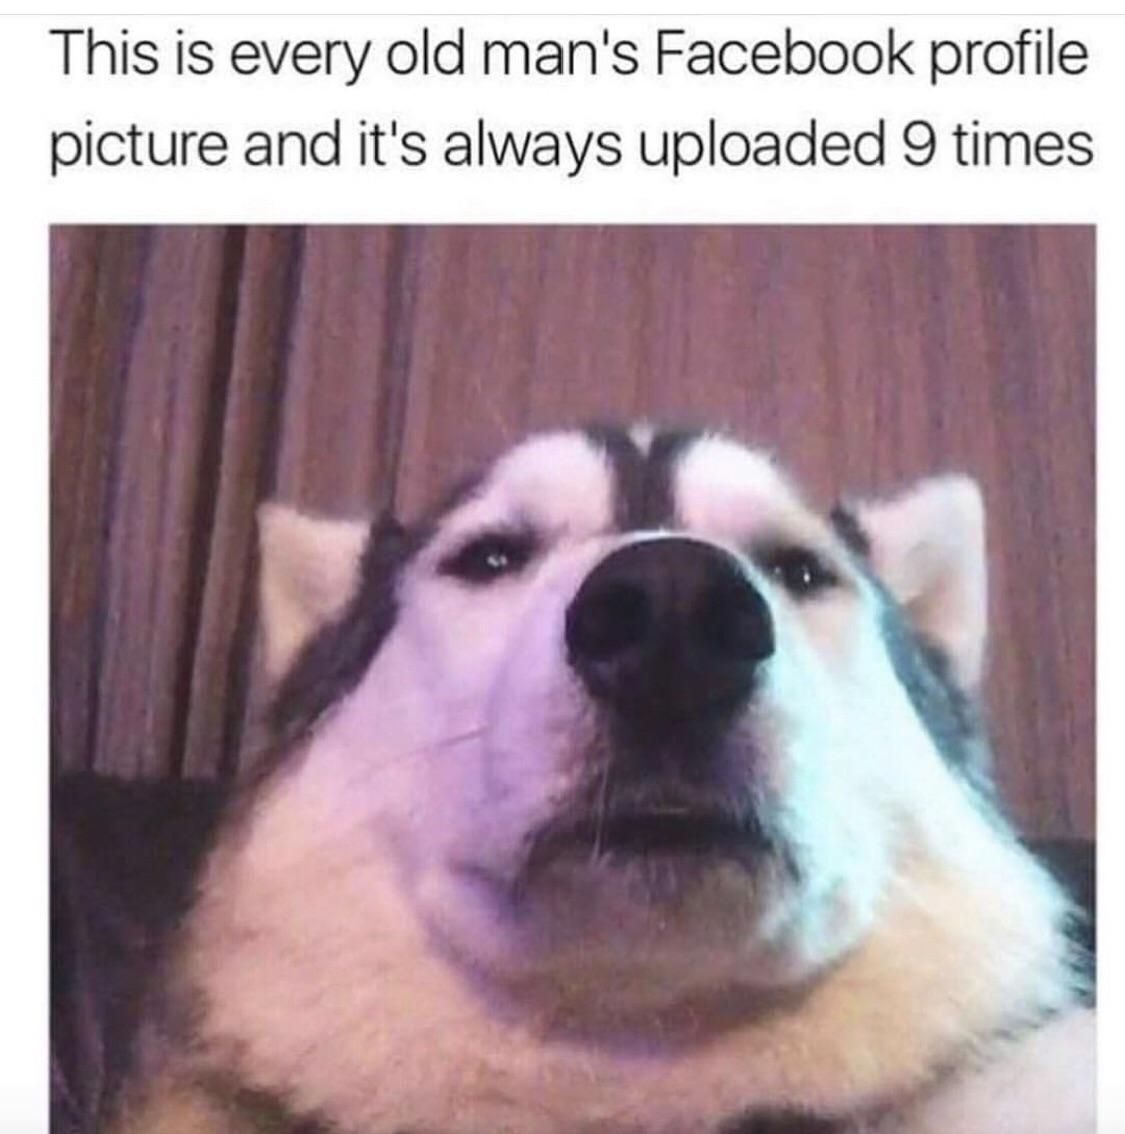 Every Old Man’s Facebook